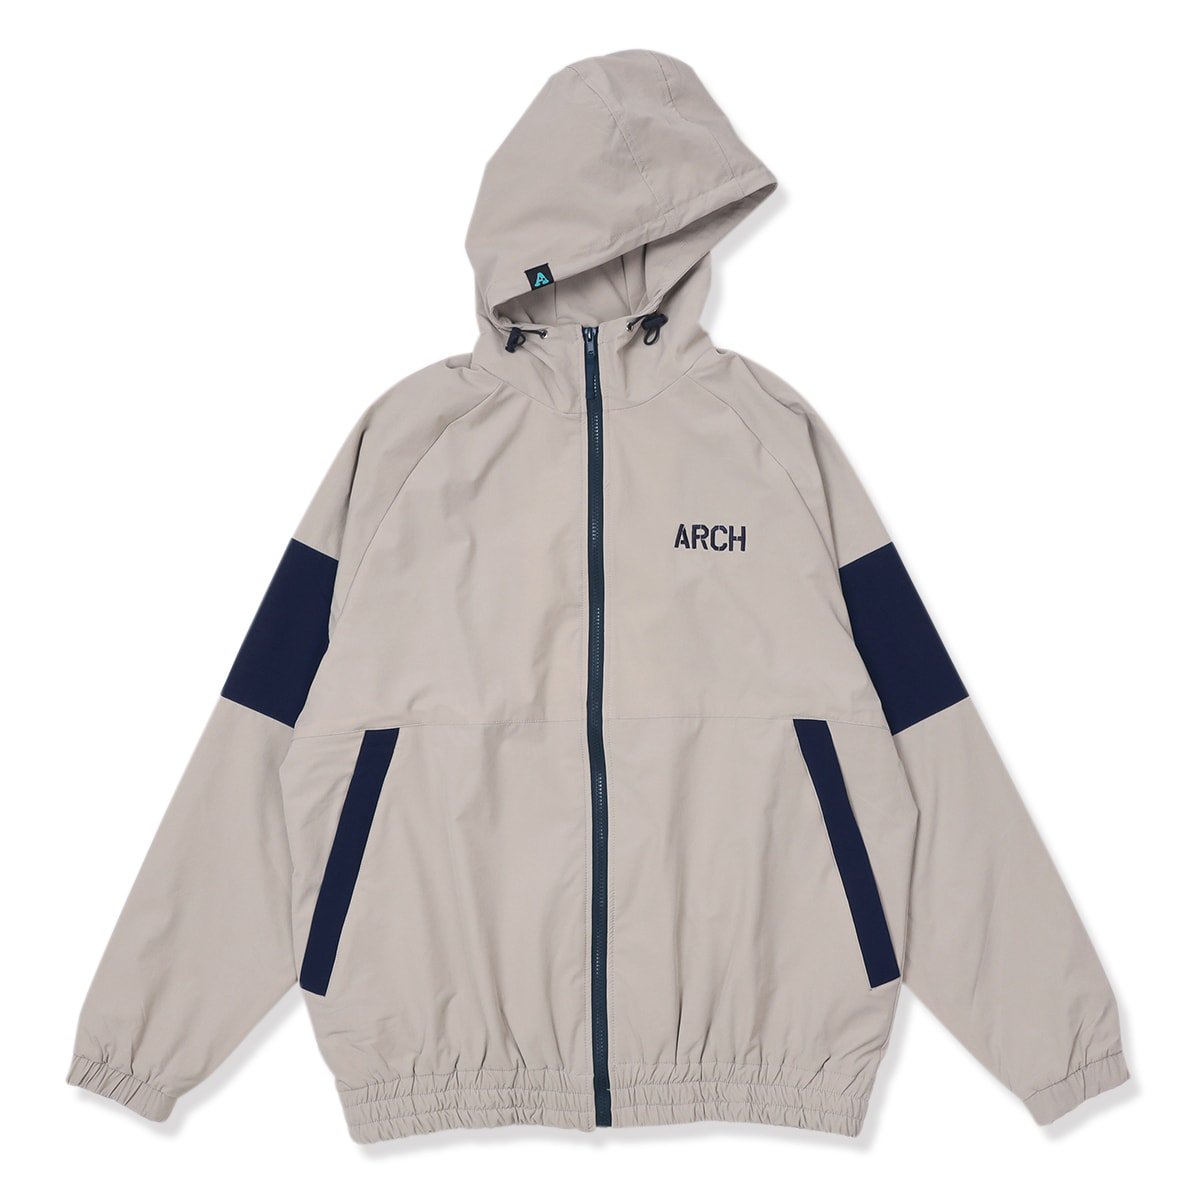 classic track jacket【stone blue】 - Arch ☆ アーチ 